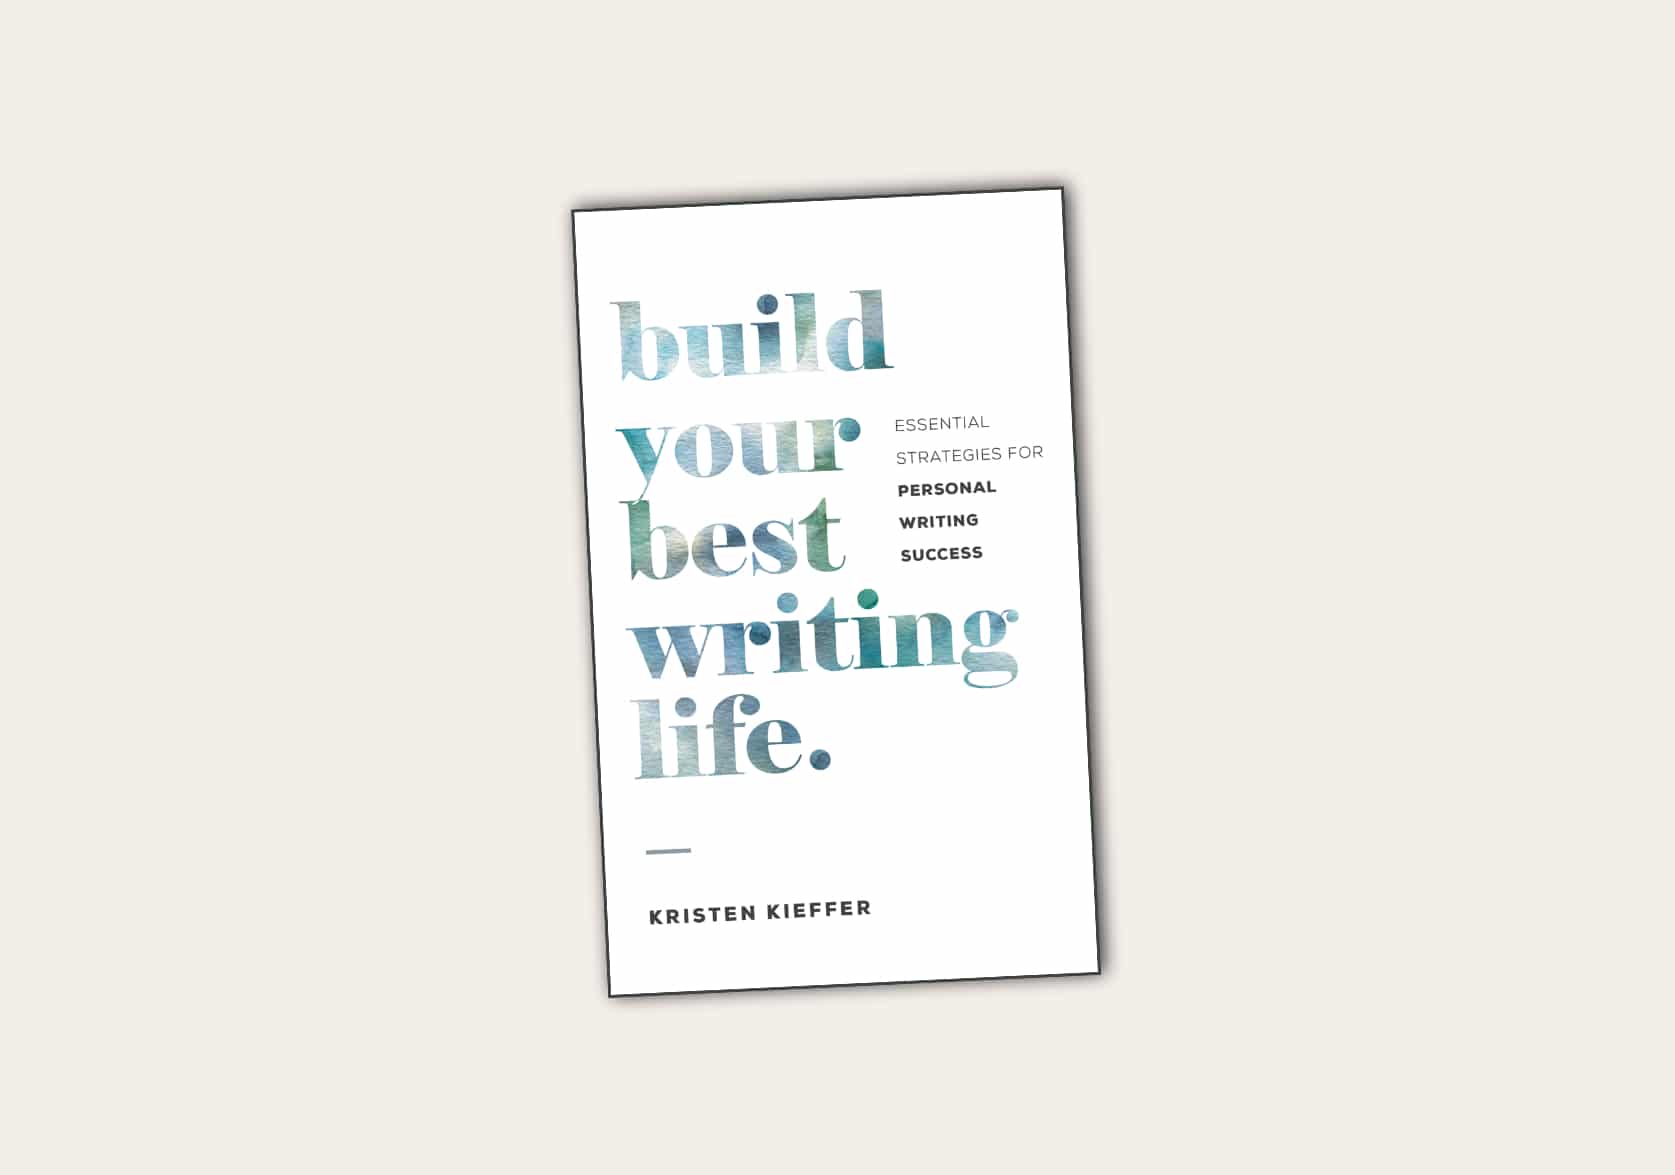 Build Your Best Writing Life: Essential Strategies for Personal Writing Success by Kristen Kieffer